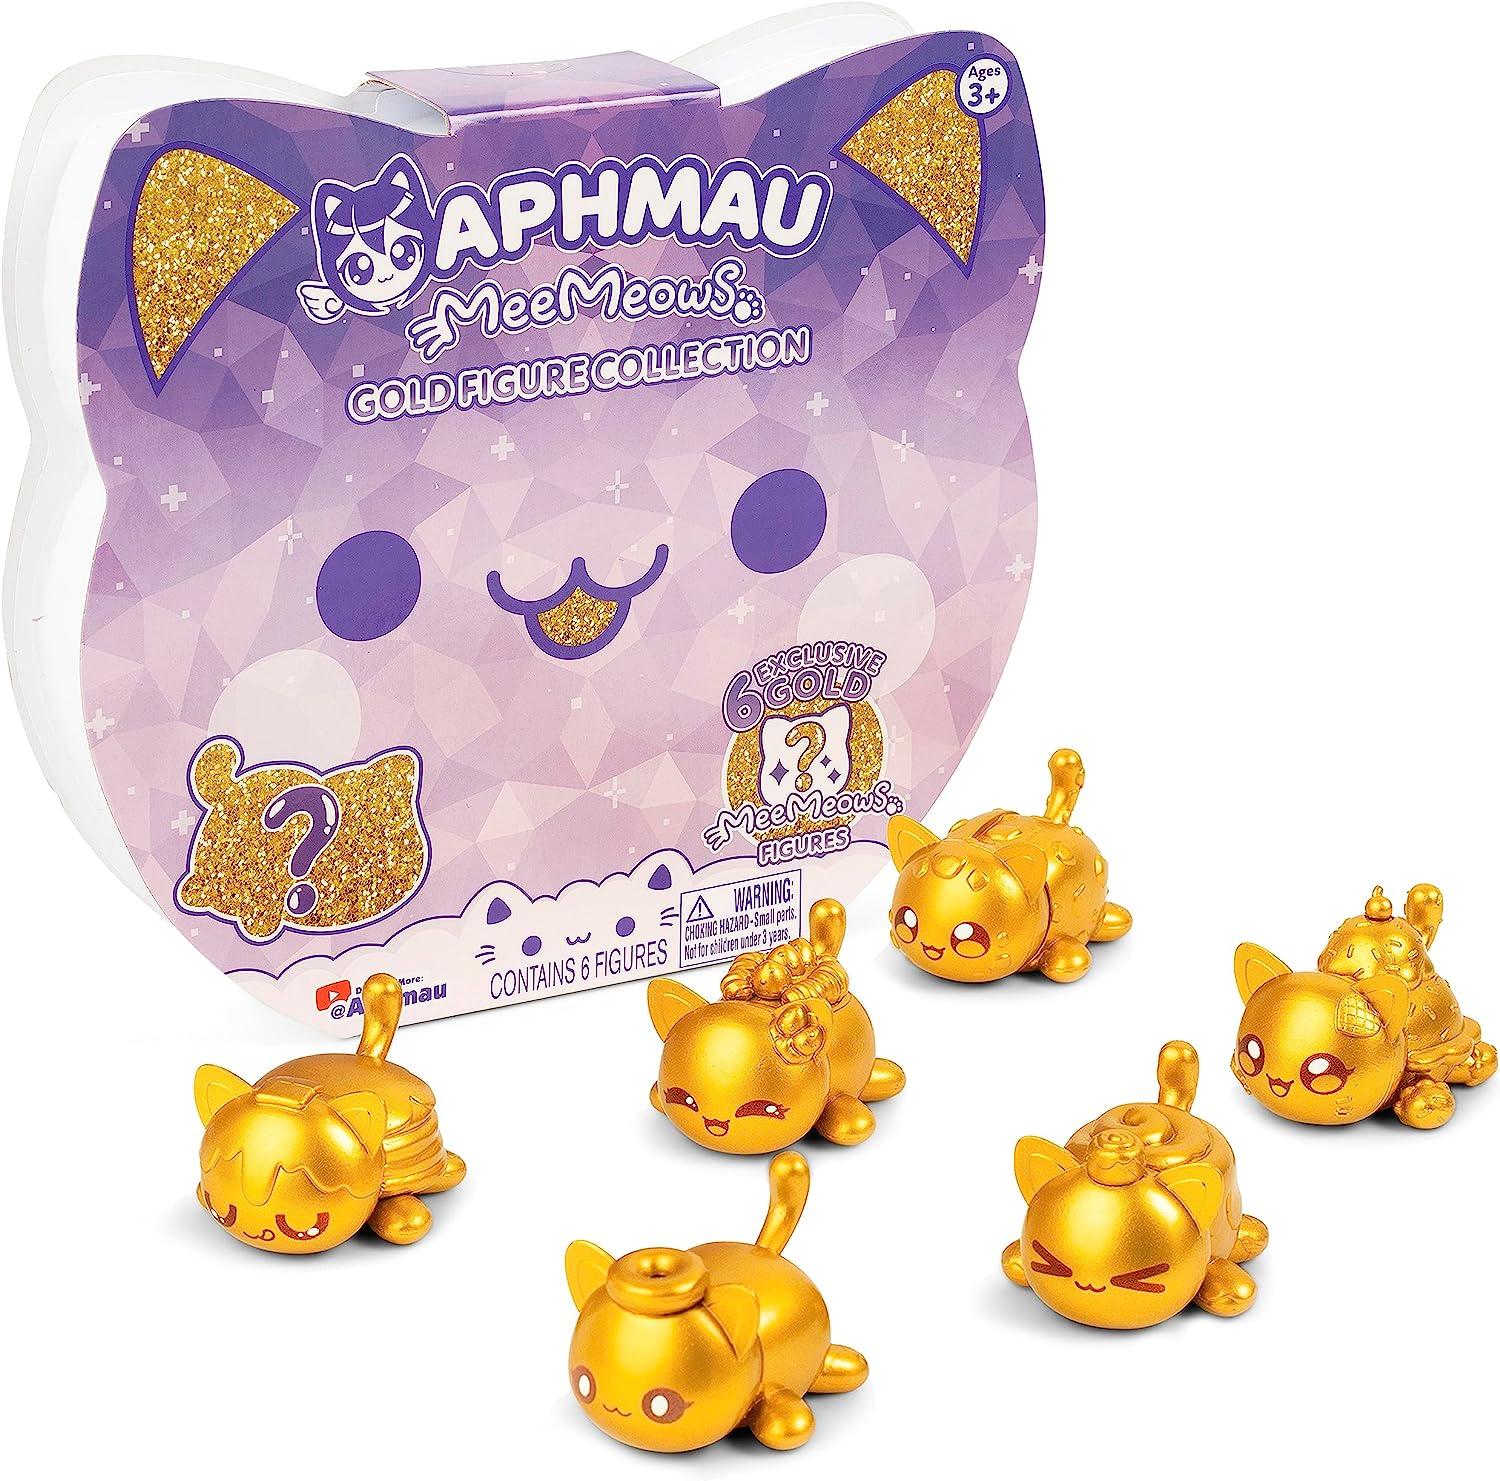 Aphmau Mystery MeeMeow MultiPack Gold